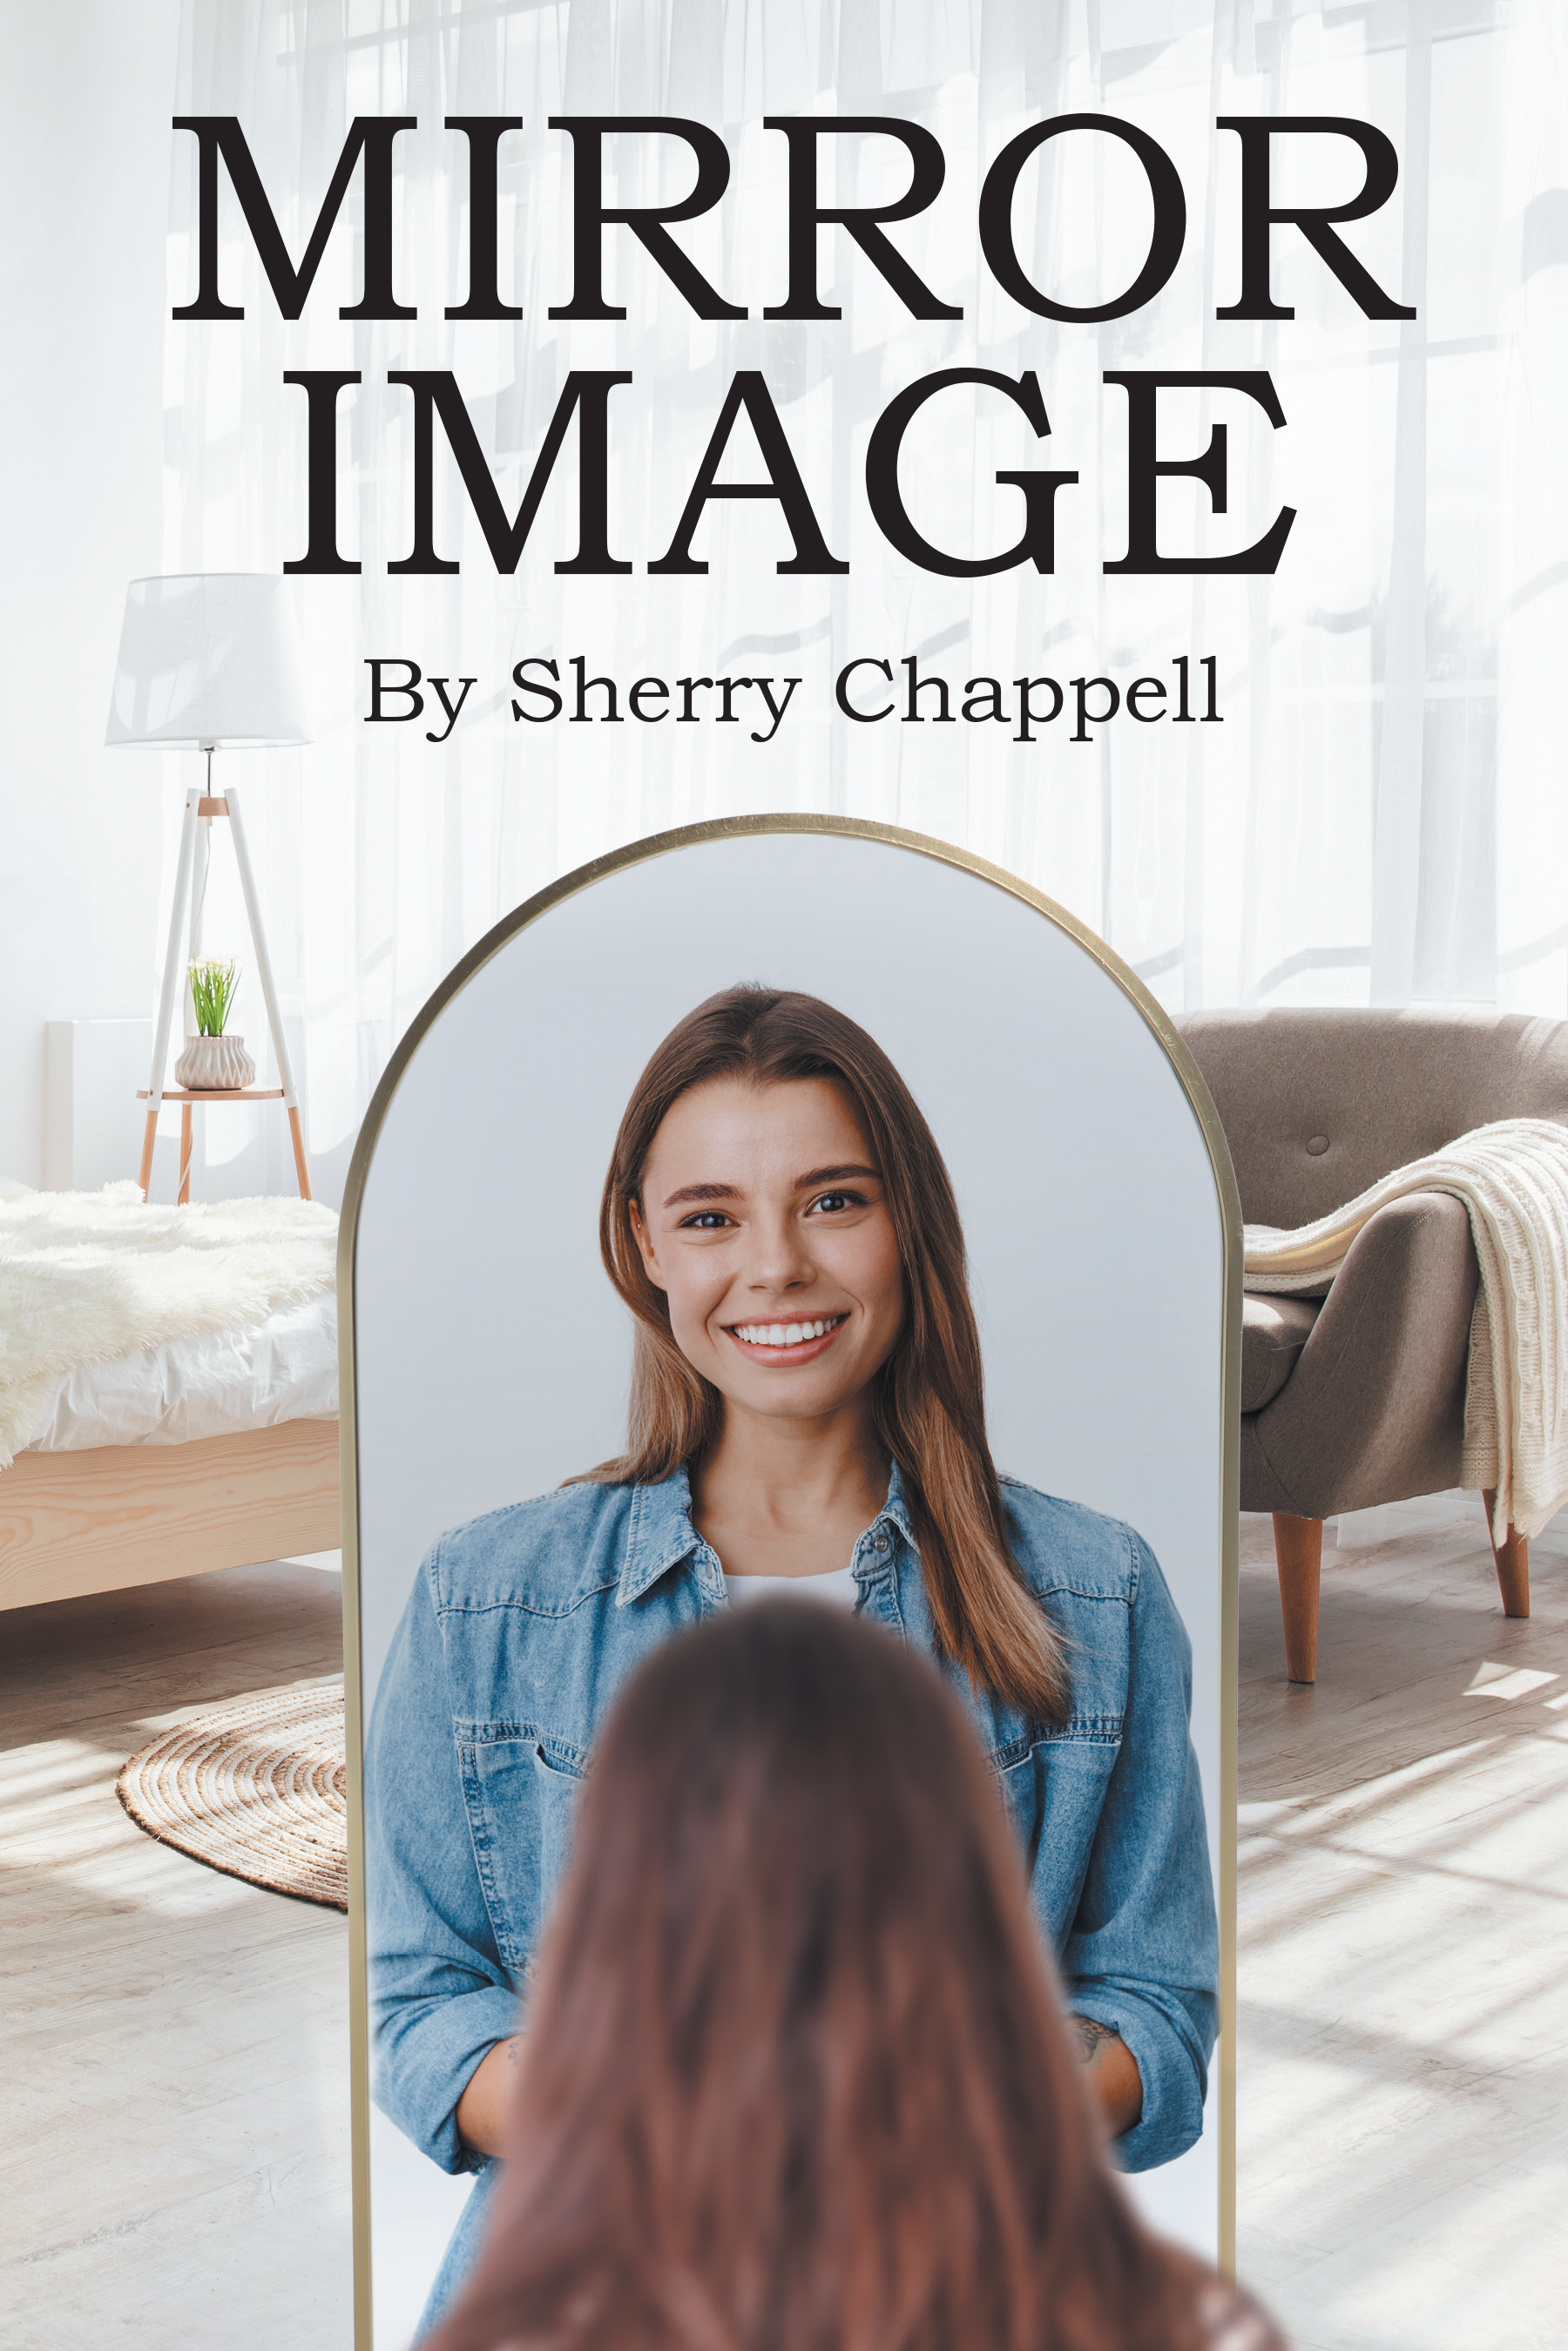 Author Sherry Chappell’s New Book, "Mirror Image," is a Fascinating Story About Identical Twin Sisters with Conflicting Values